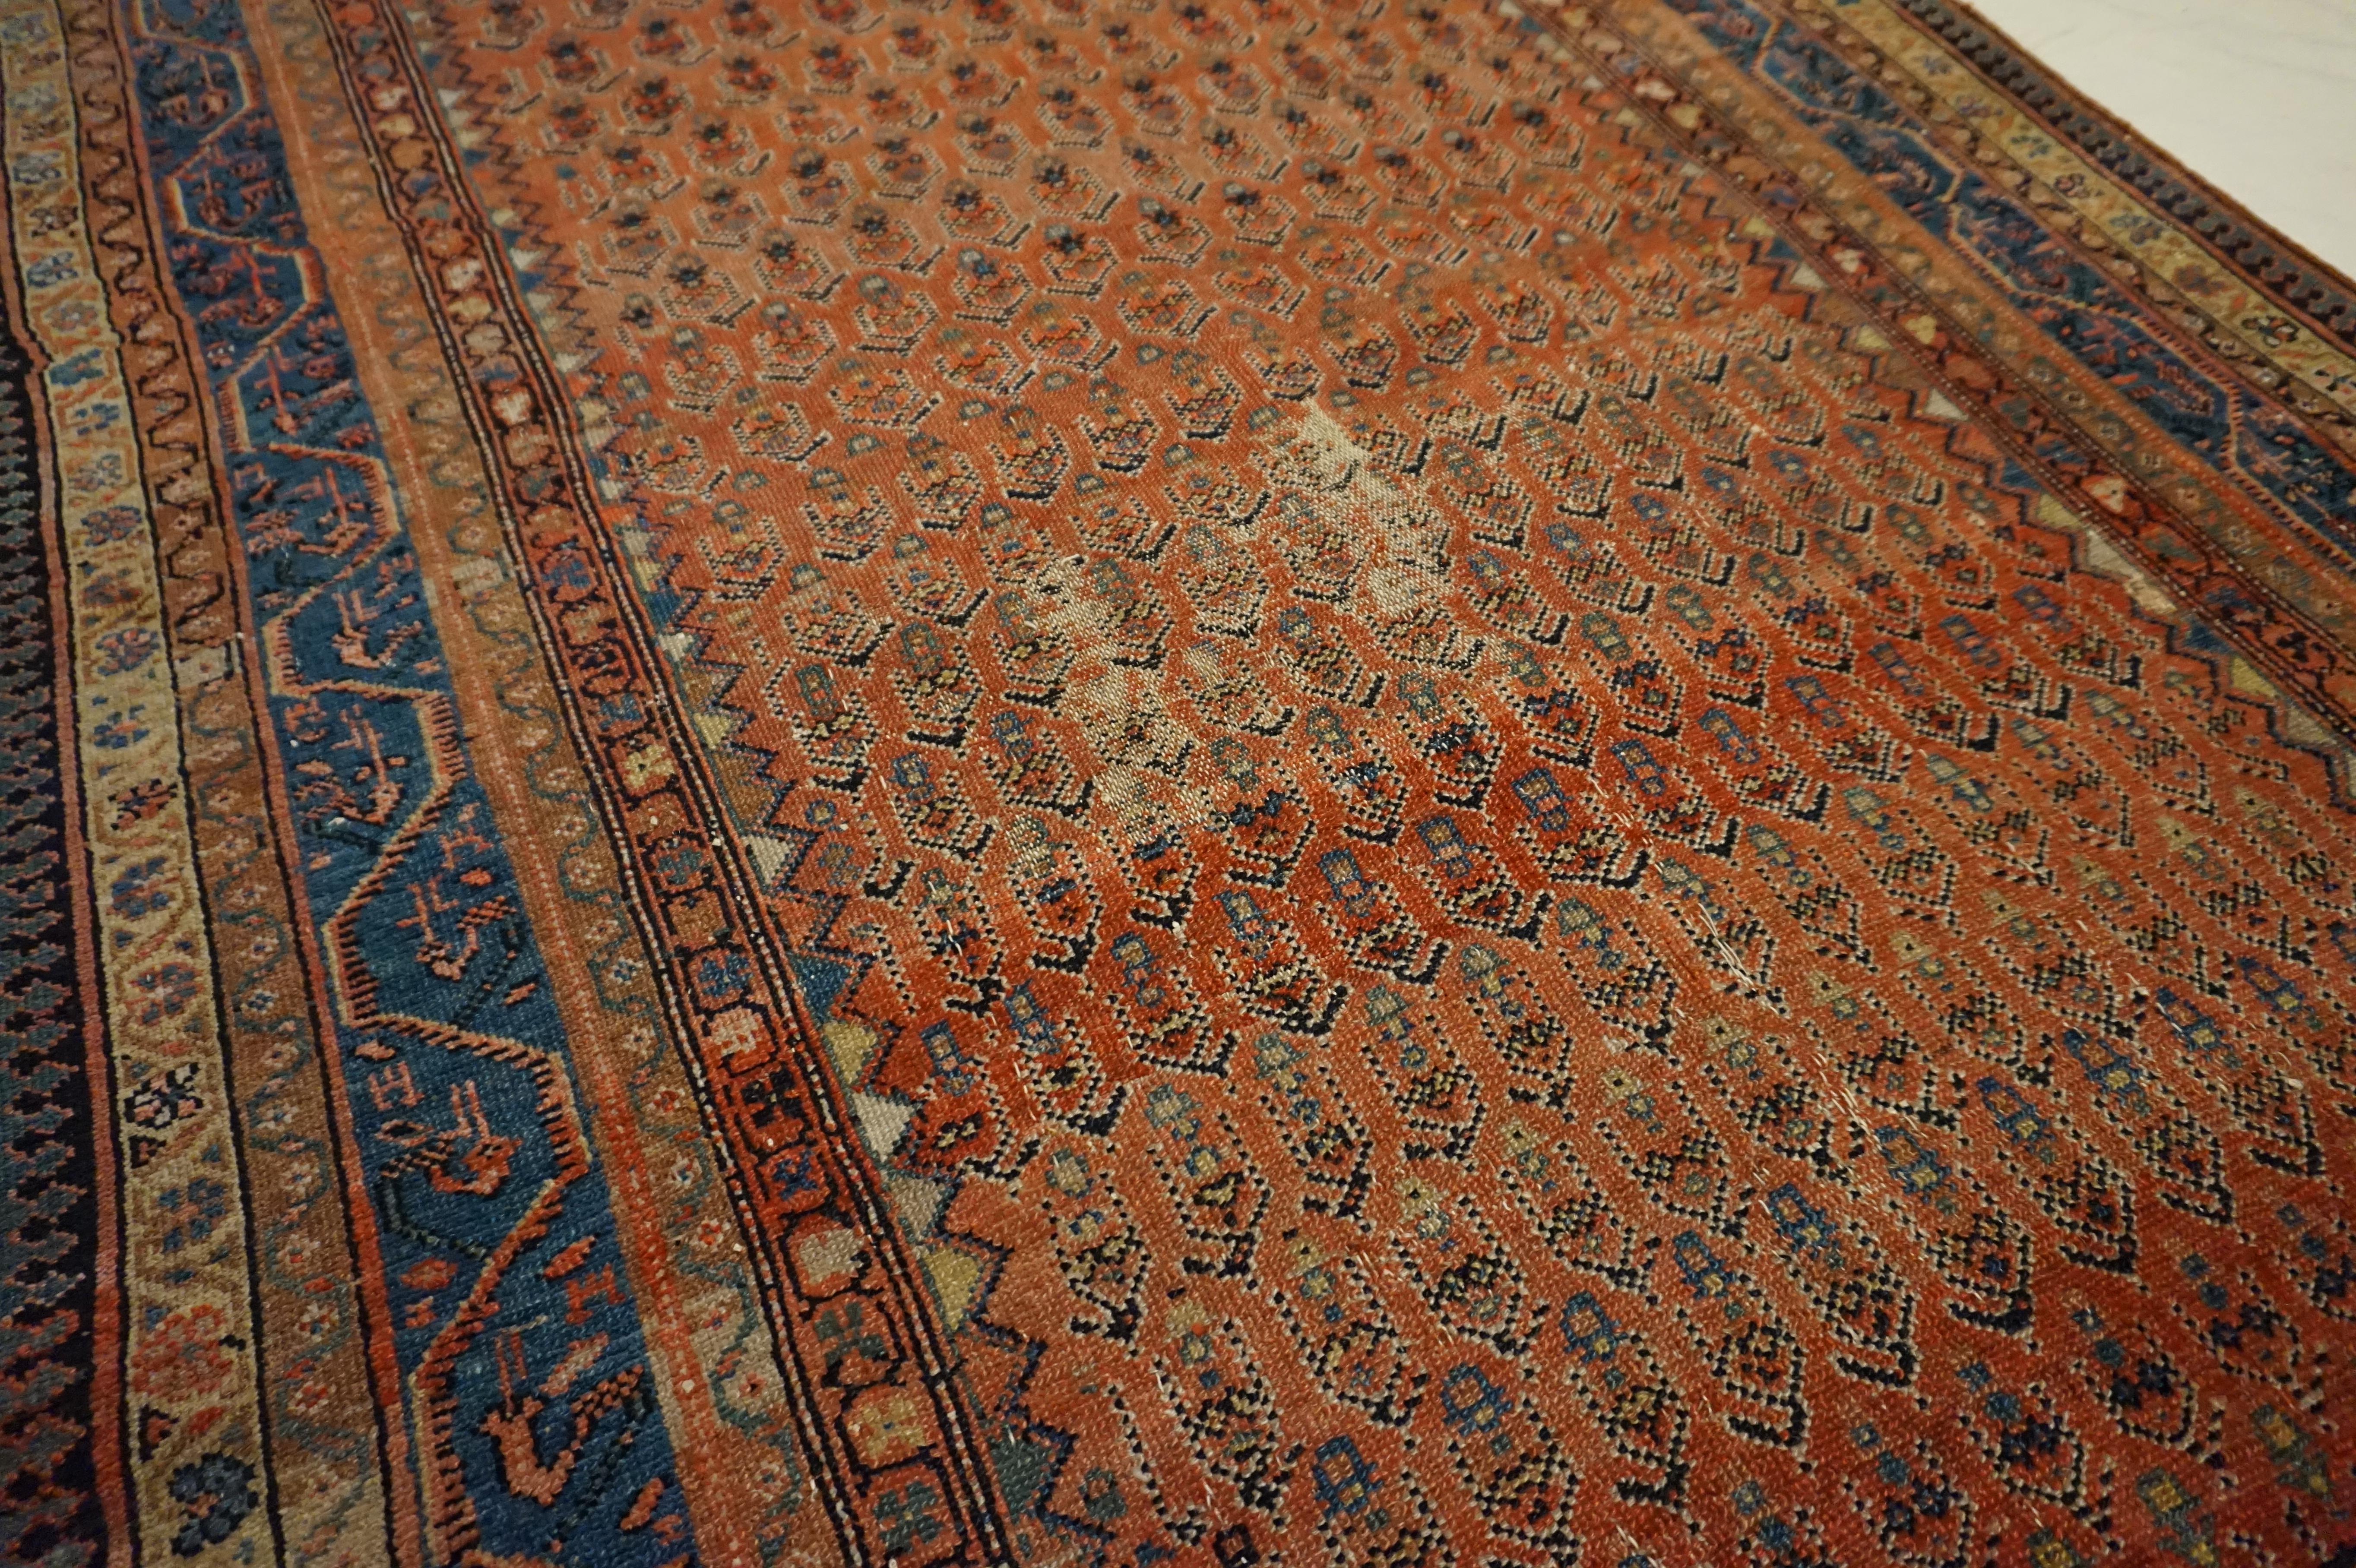 Hand-Knotted 19th Century Tribal Boteh Paisley Hand-knotted Rug In Rust Hues For Sale